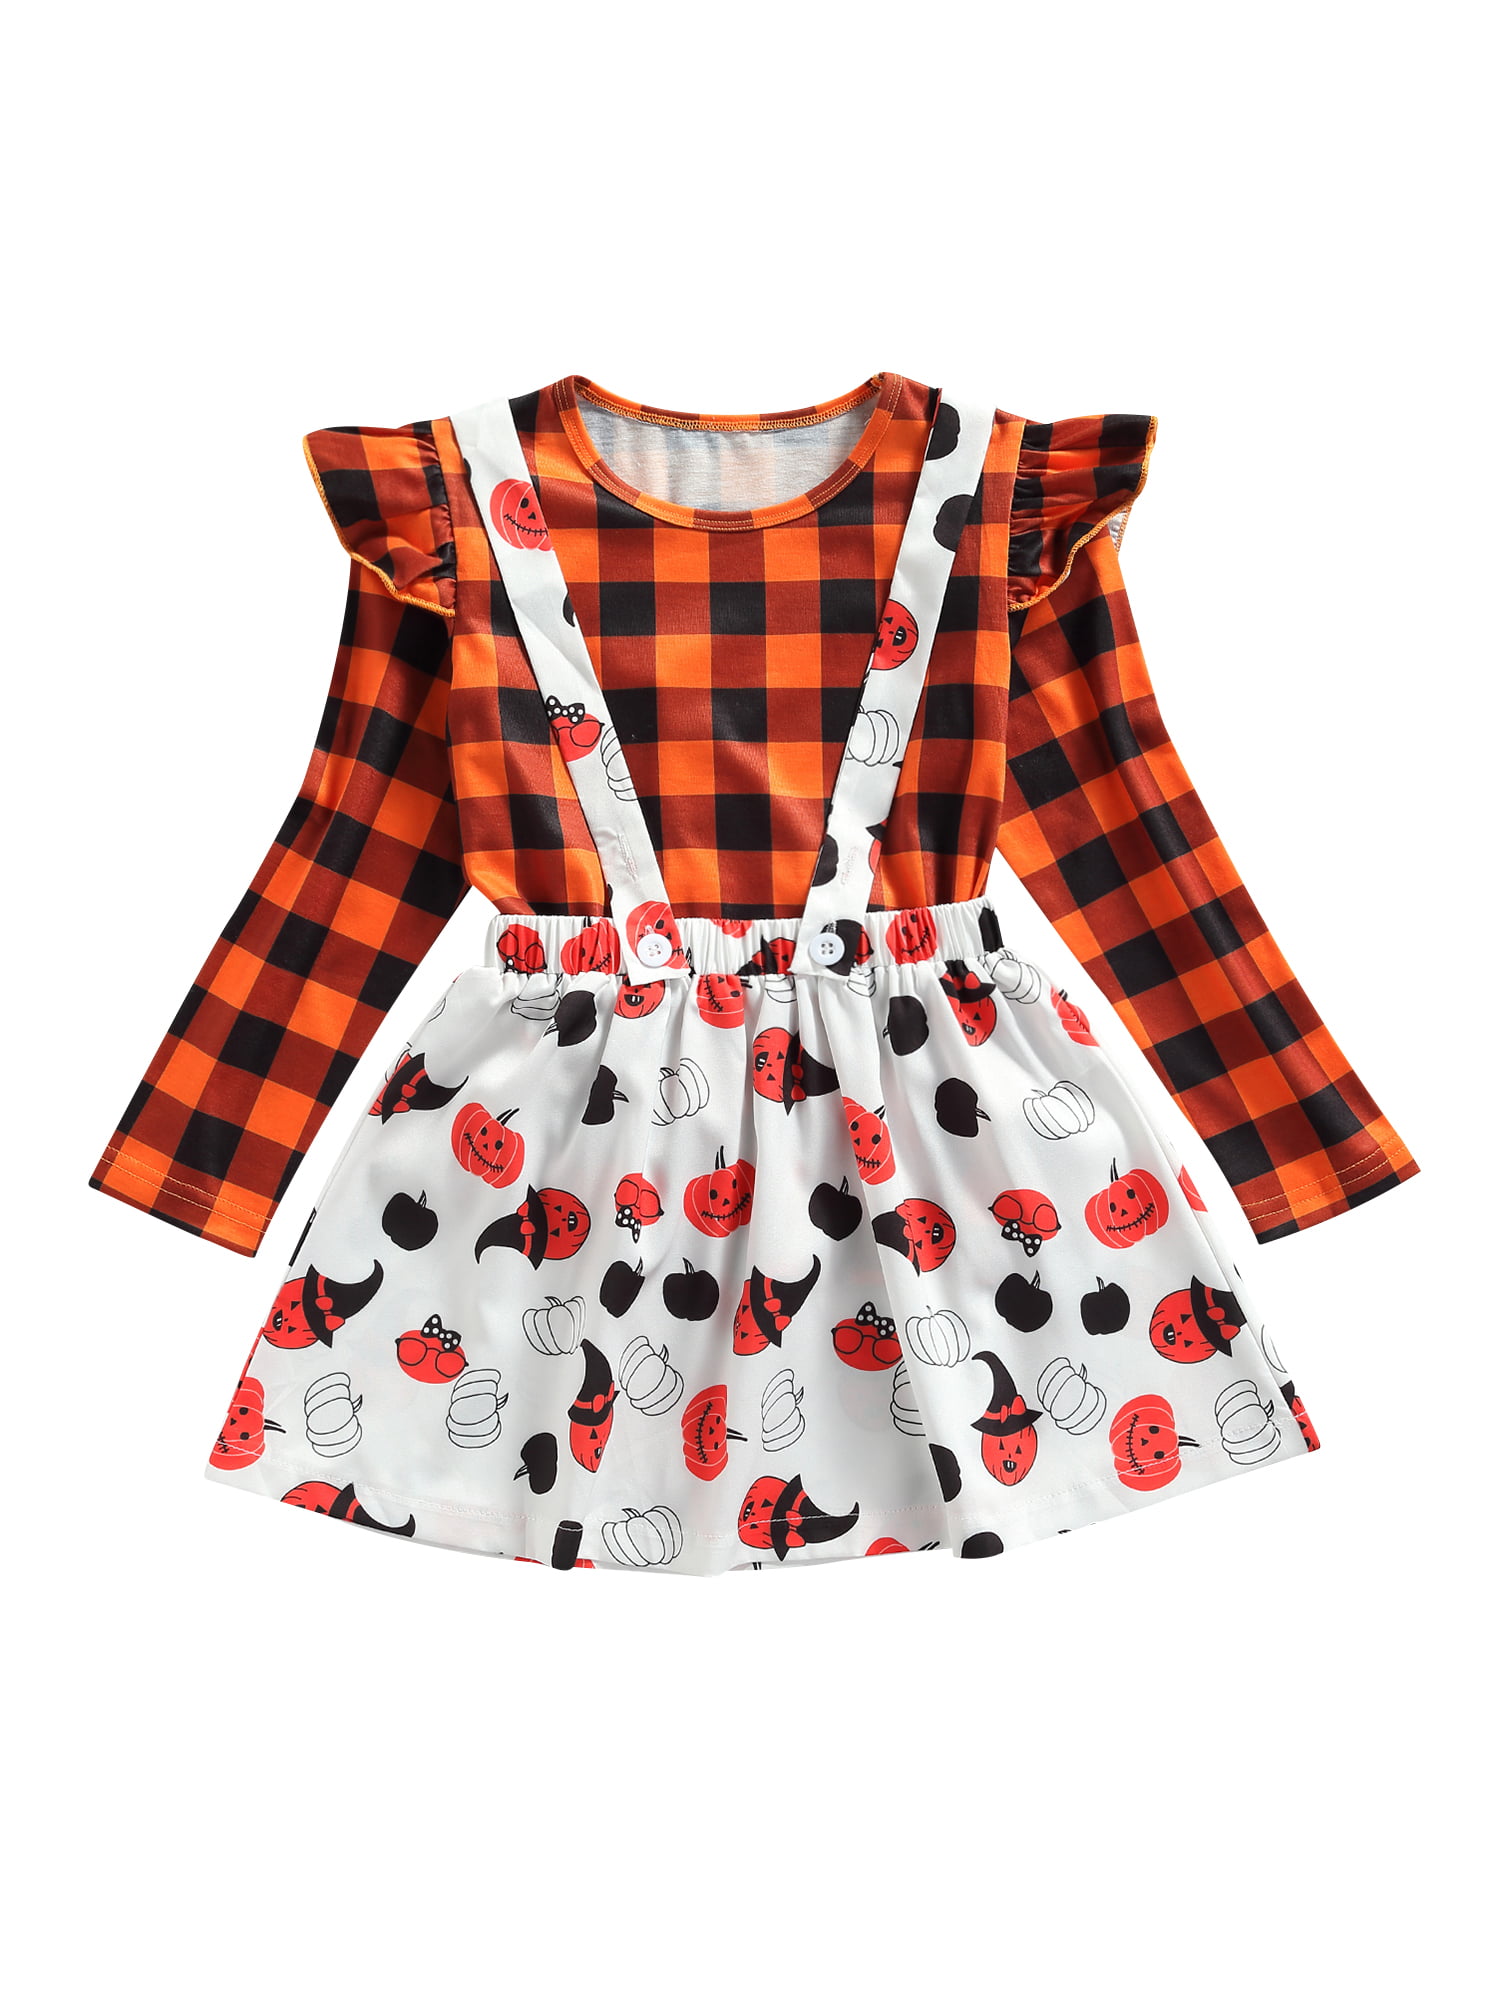 Checked Pumpkin Suspenders Skirt 2pcs Holiday Clothes Baby Girl Halloween Outfits Set Toddler Ruffles Shirt 